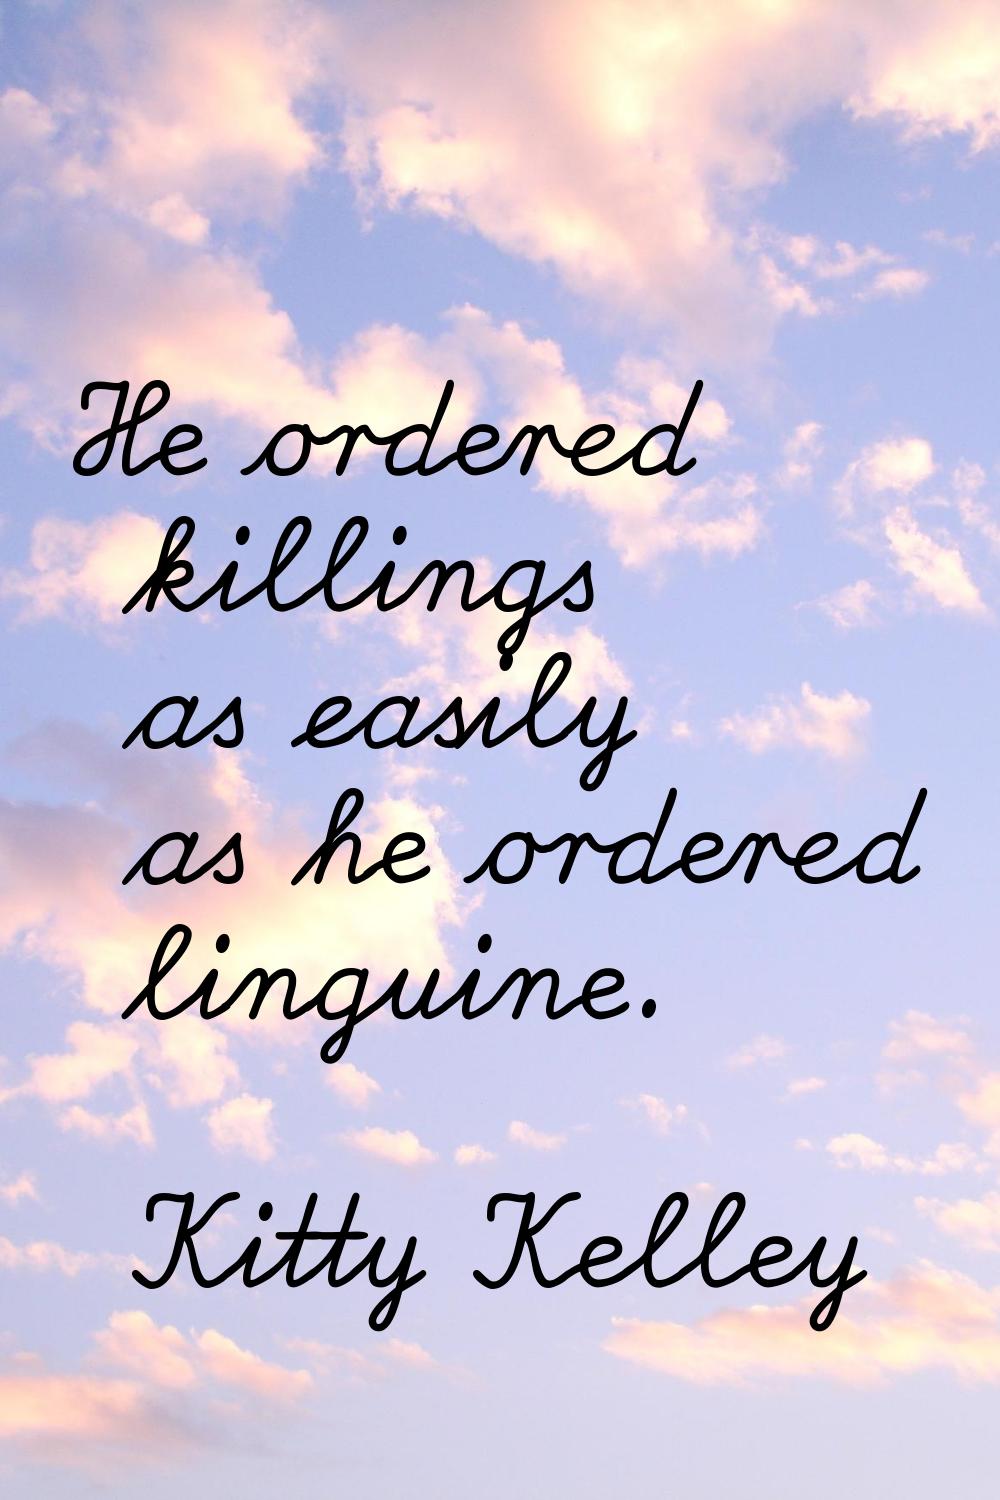 He ordered killings as easily as he ordered linguine.